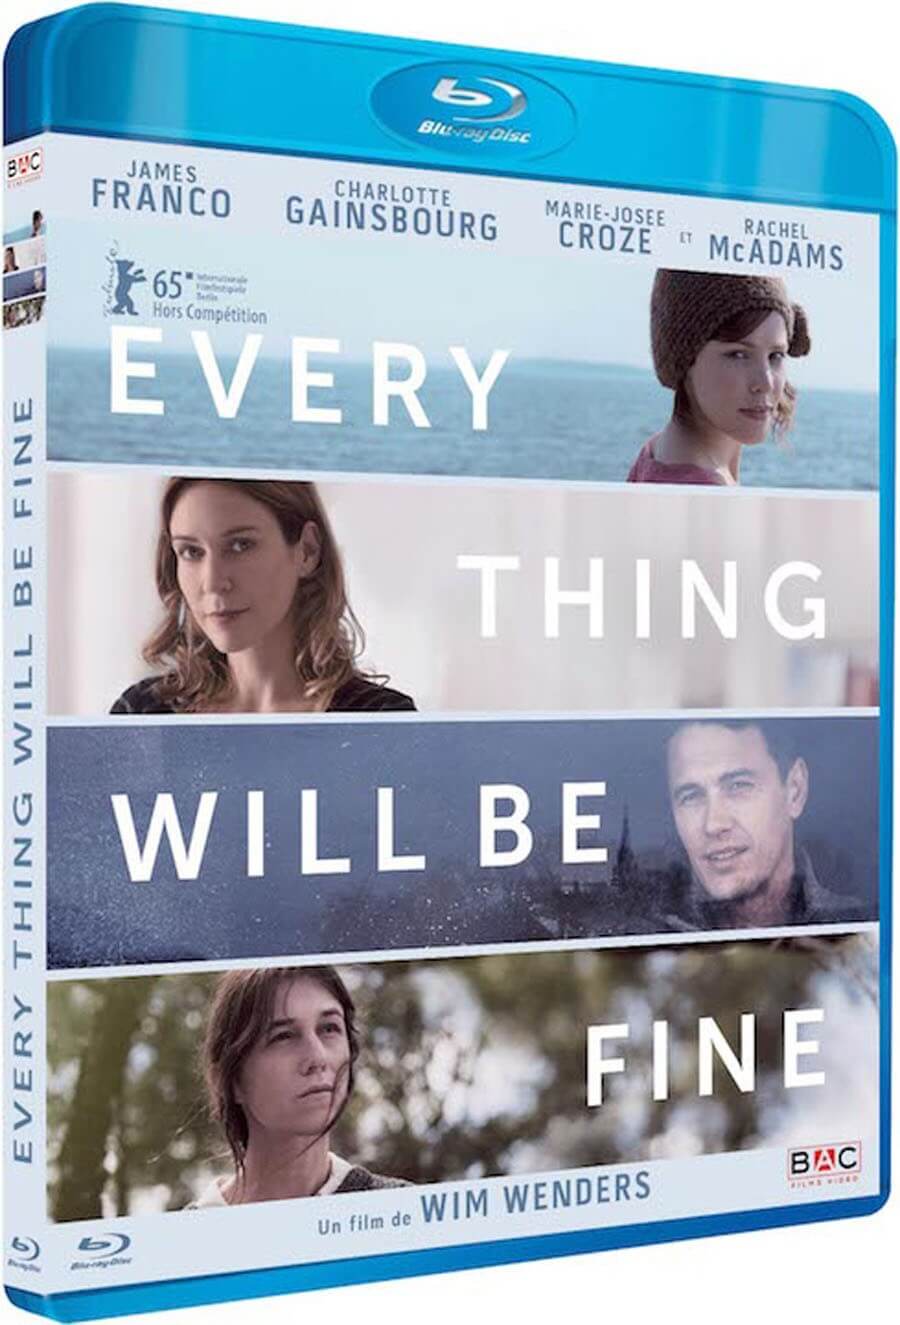 EVERY THING WILL BE FINE